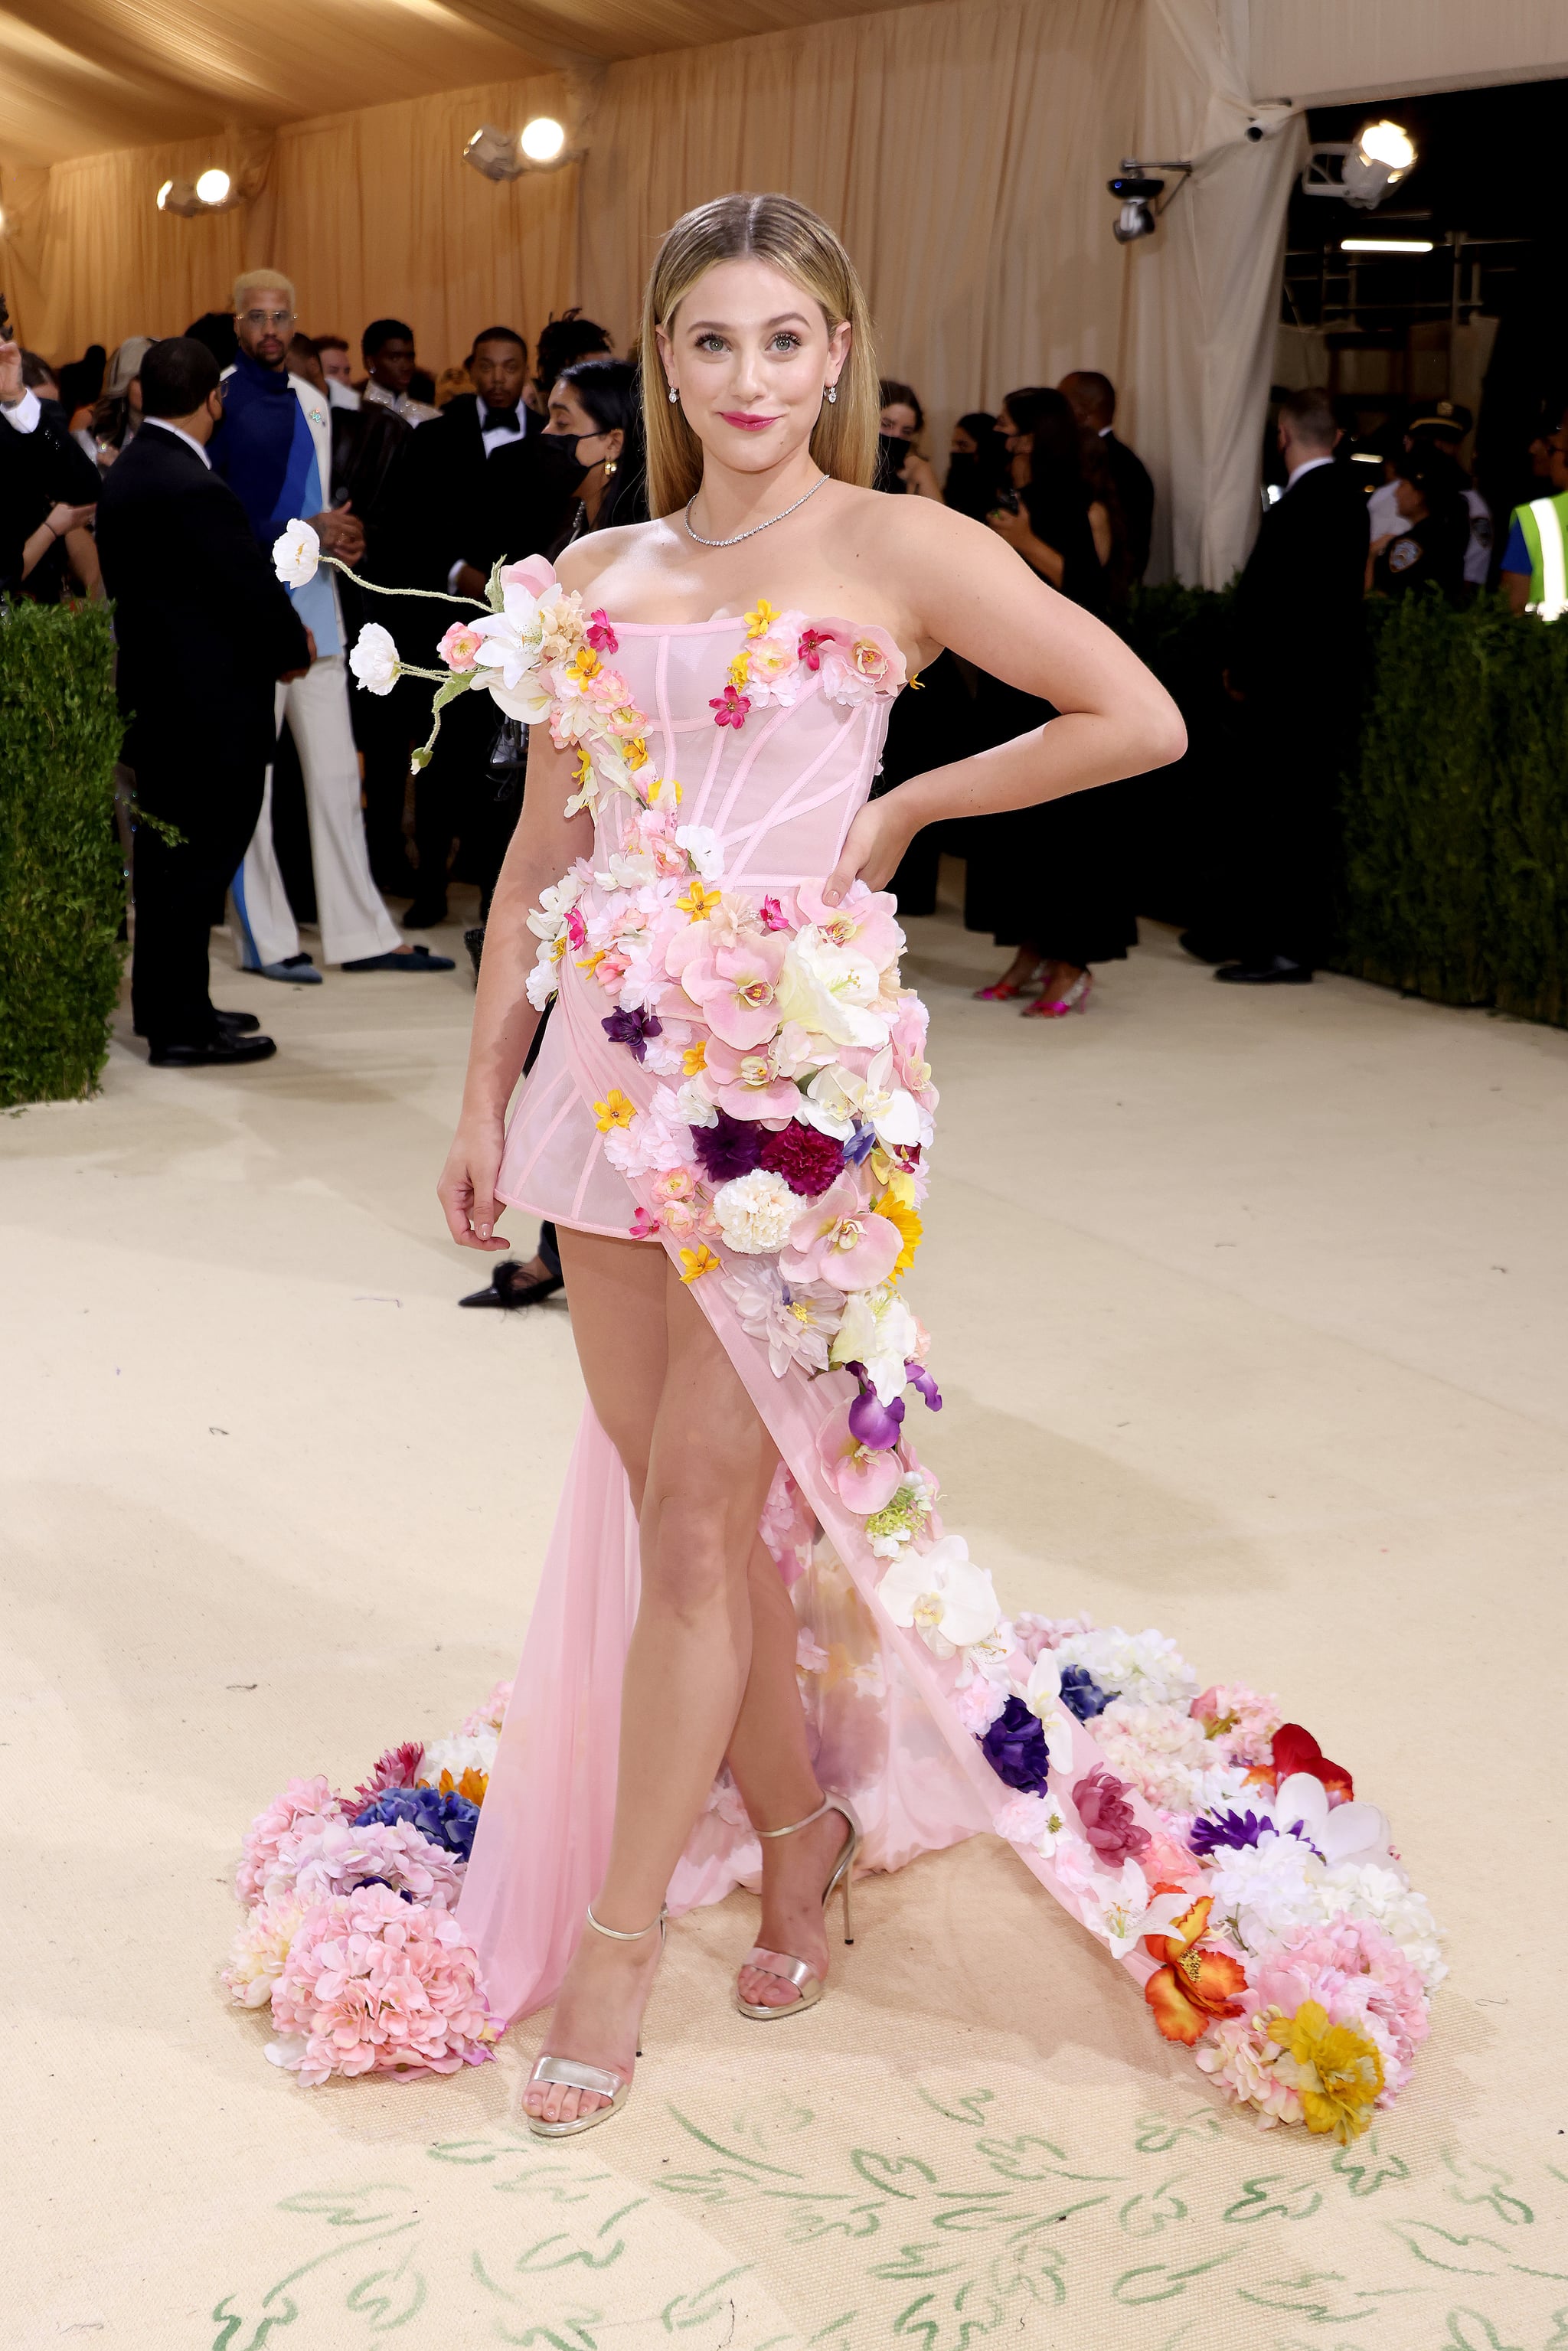 Lili Reinhart at the 2021 Met Gala | Every Look From the 2021 Met Gala Red Carpet That We Can&#39;t Stop Talking About | POPSUGAR Fashion Photo 158